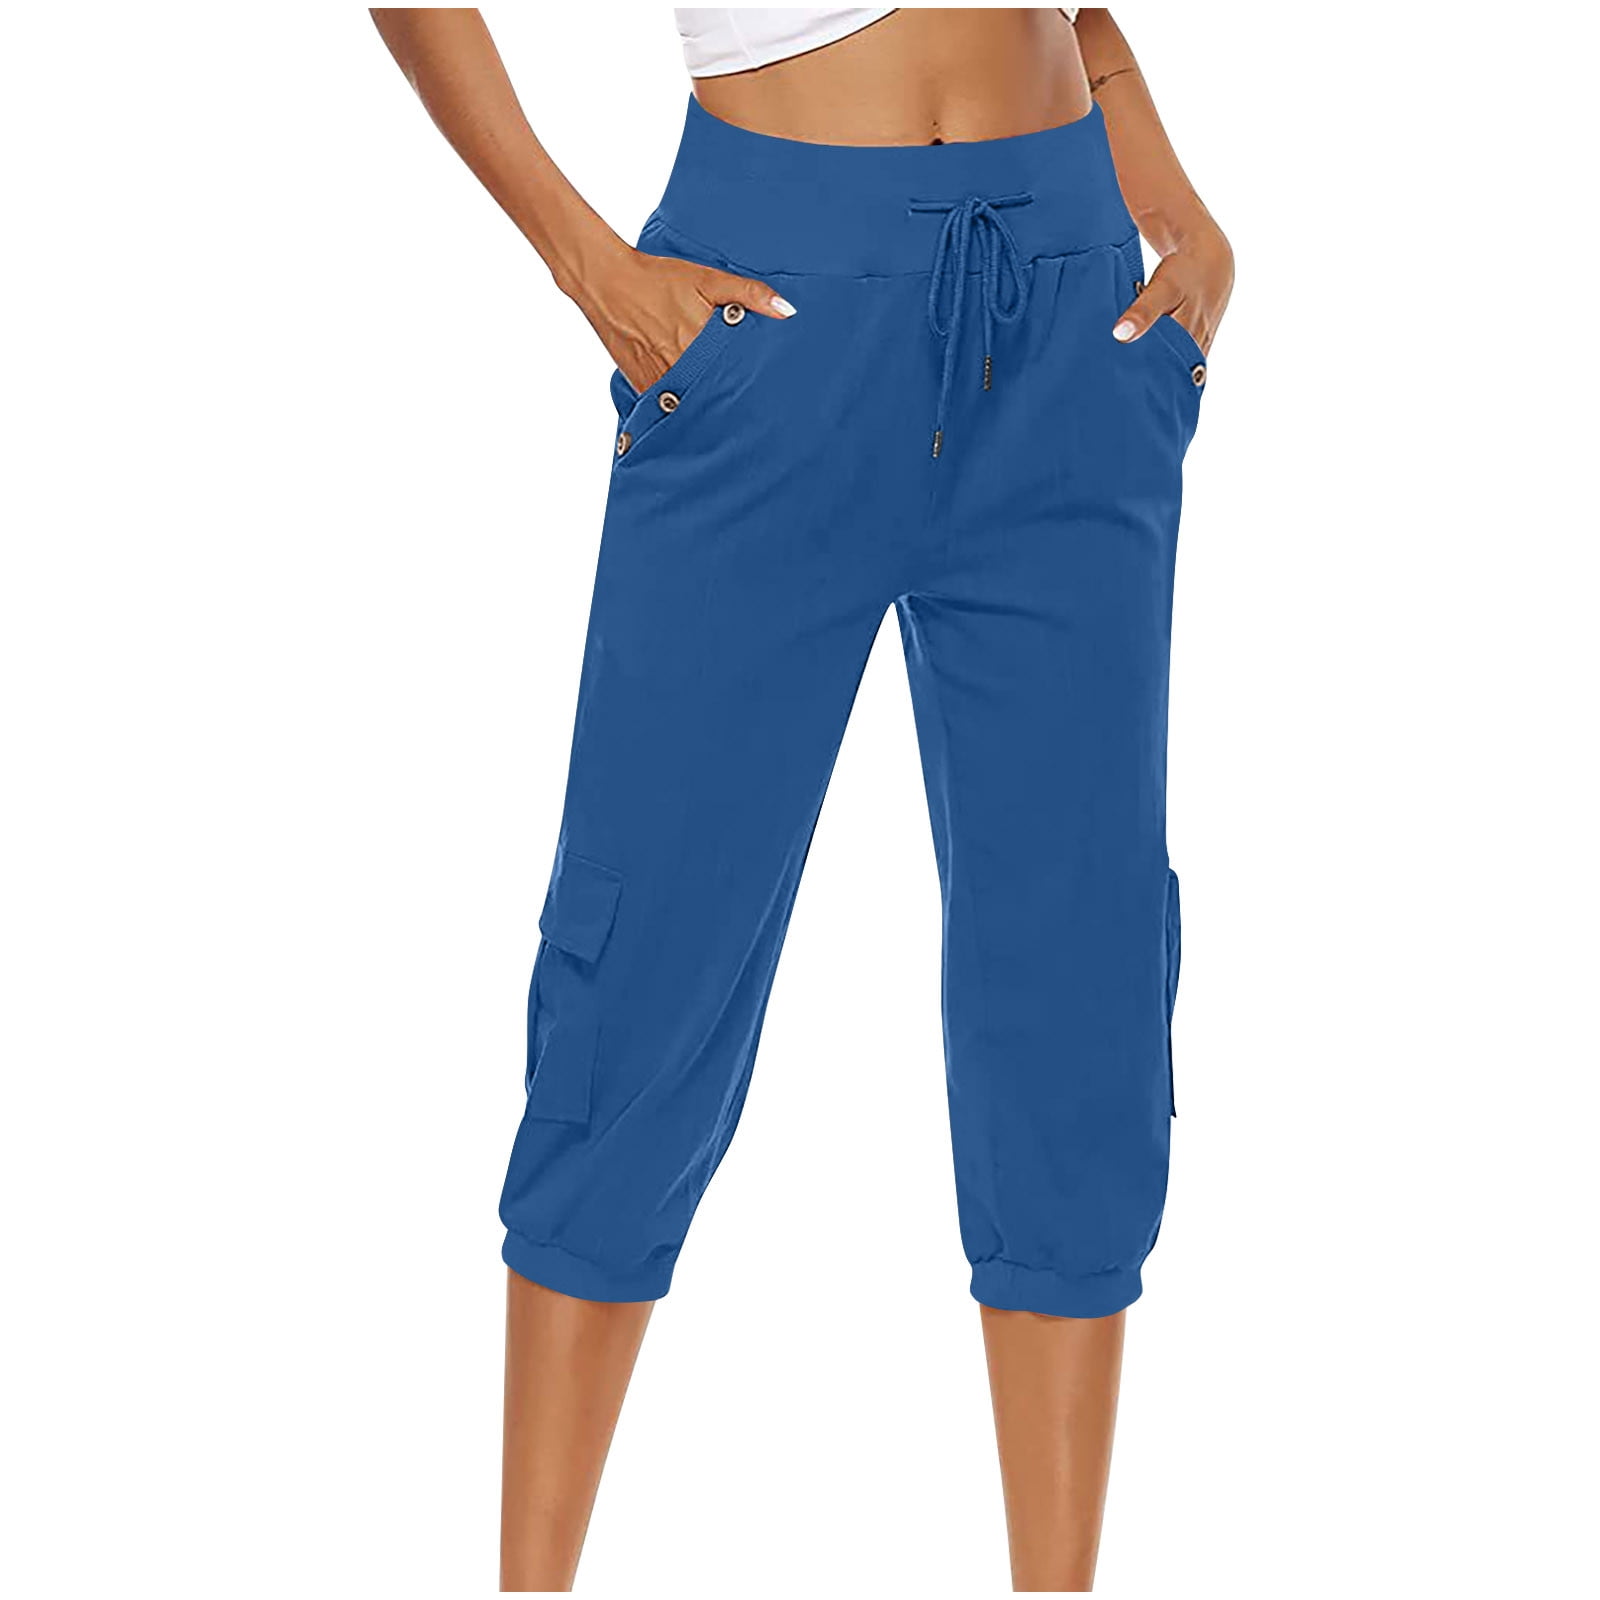 Capri Pant Offer: Buy 3/4 Pants for Girls at Special Price